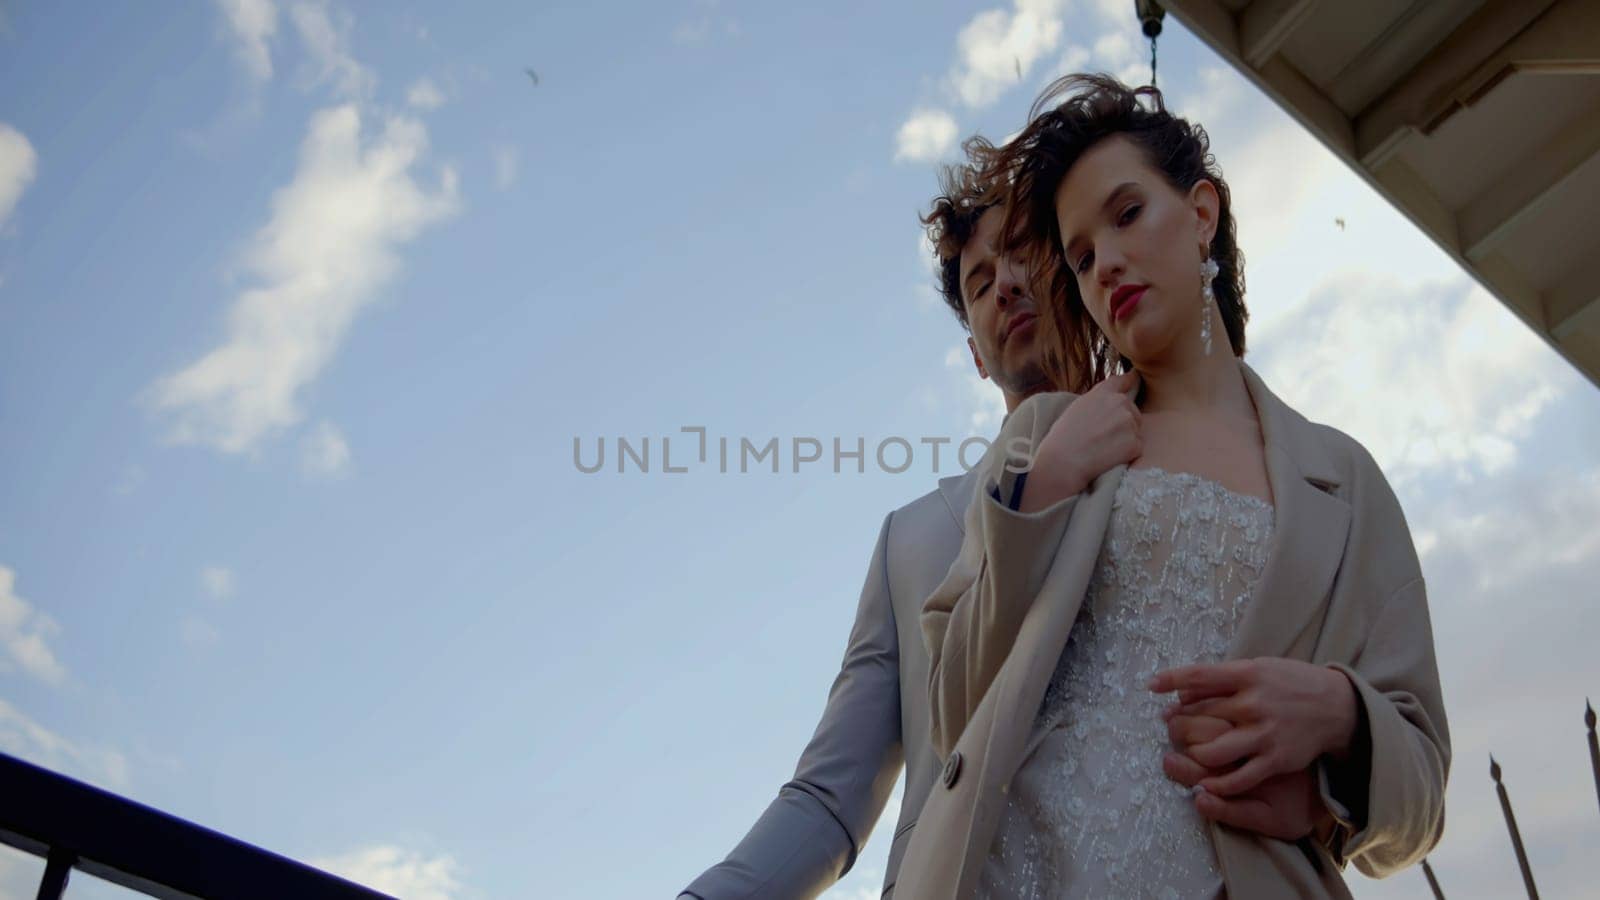 Newlyweds portrait in the city street. Action. Lovely caucasian bride, groom embracing on their wedding day